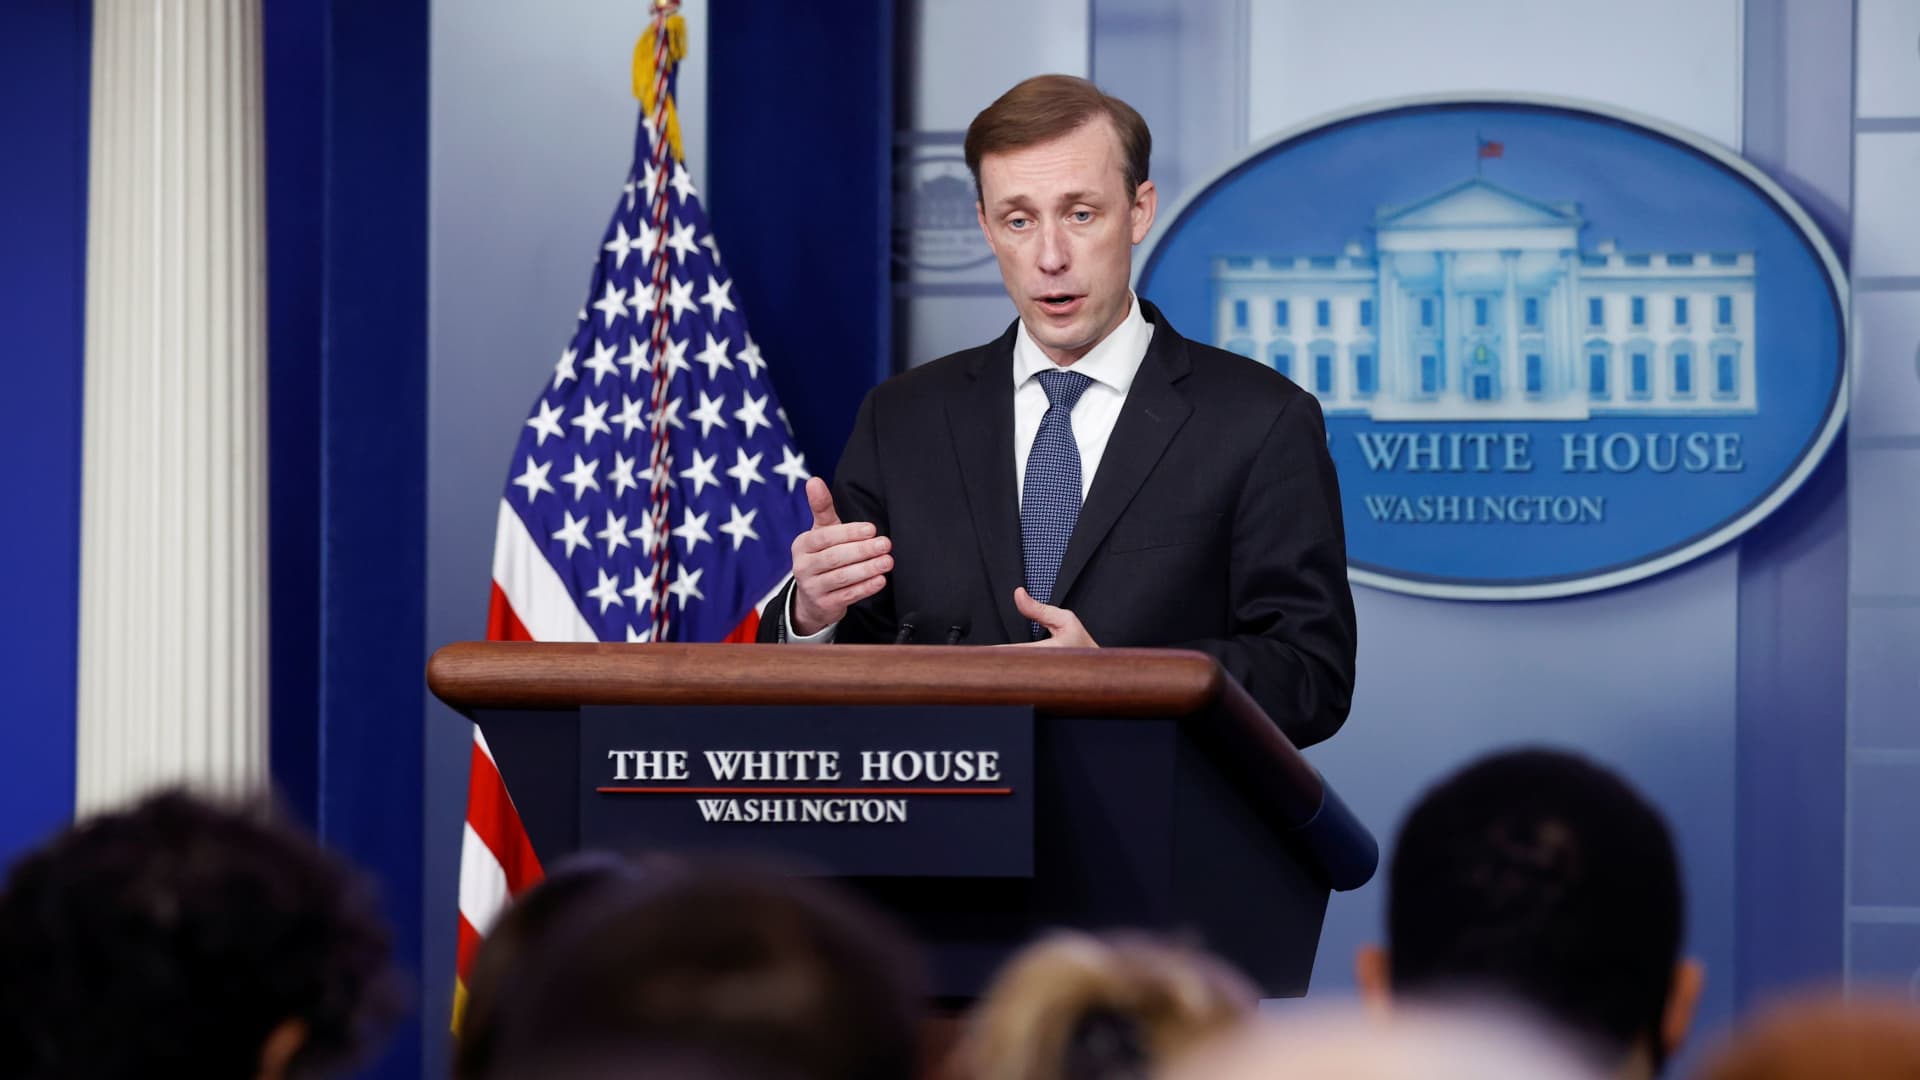 White House National Security Advisor Jake Sullivan addresses the daily press briefing at the White House in Washington, U.S. October 26, 2021.